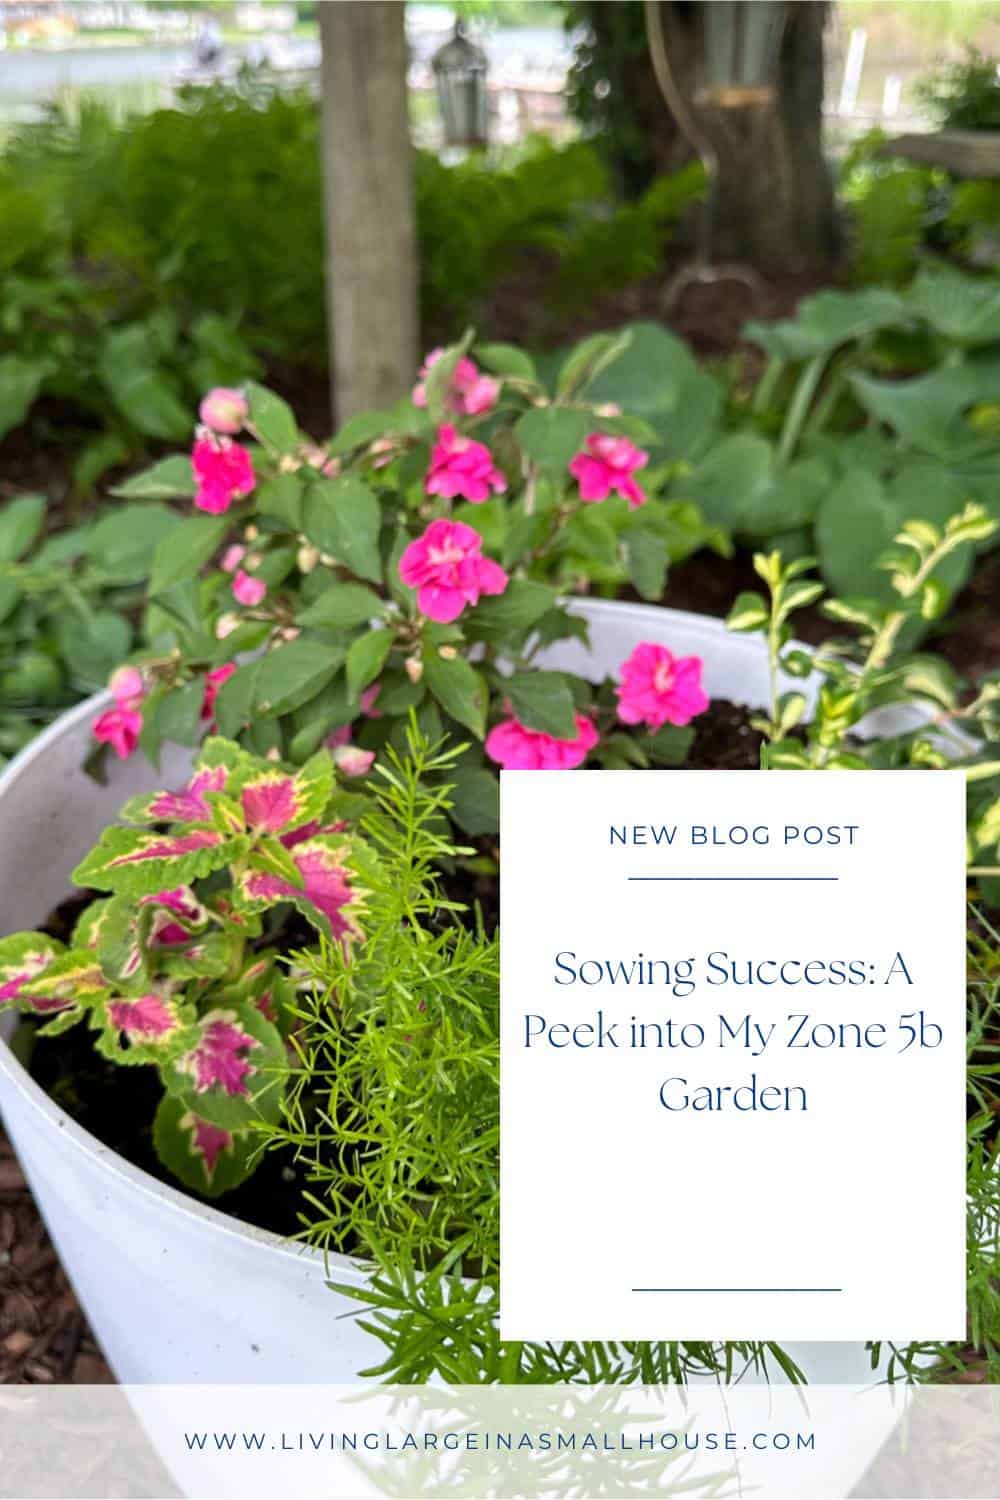 A pinterest pin graphic for my blog post: what I've planted in my zone 5b gardens